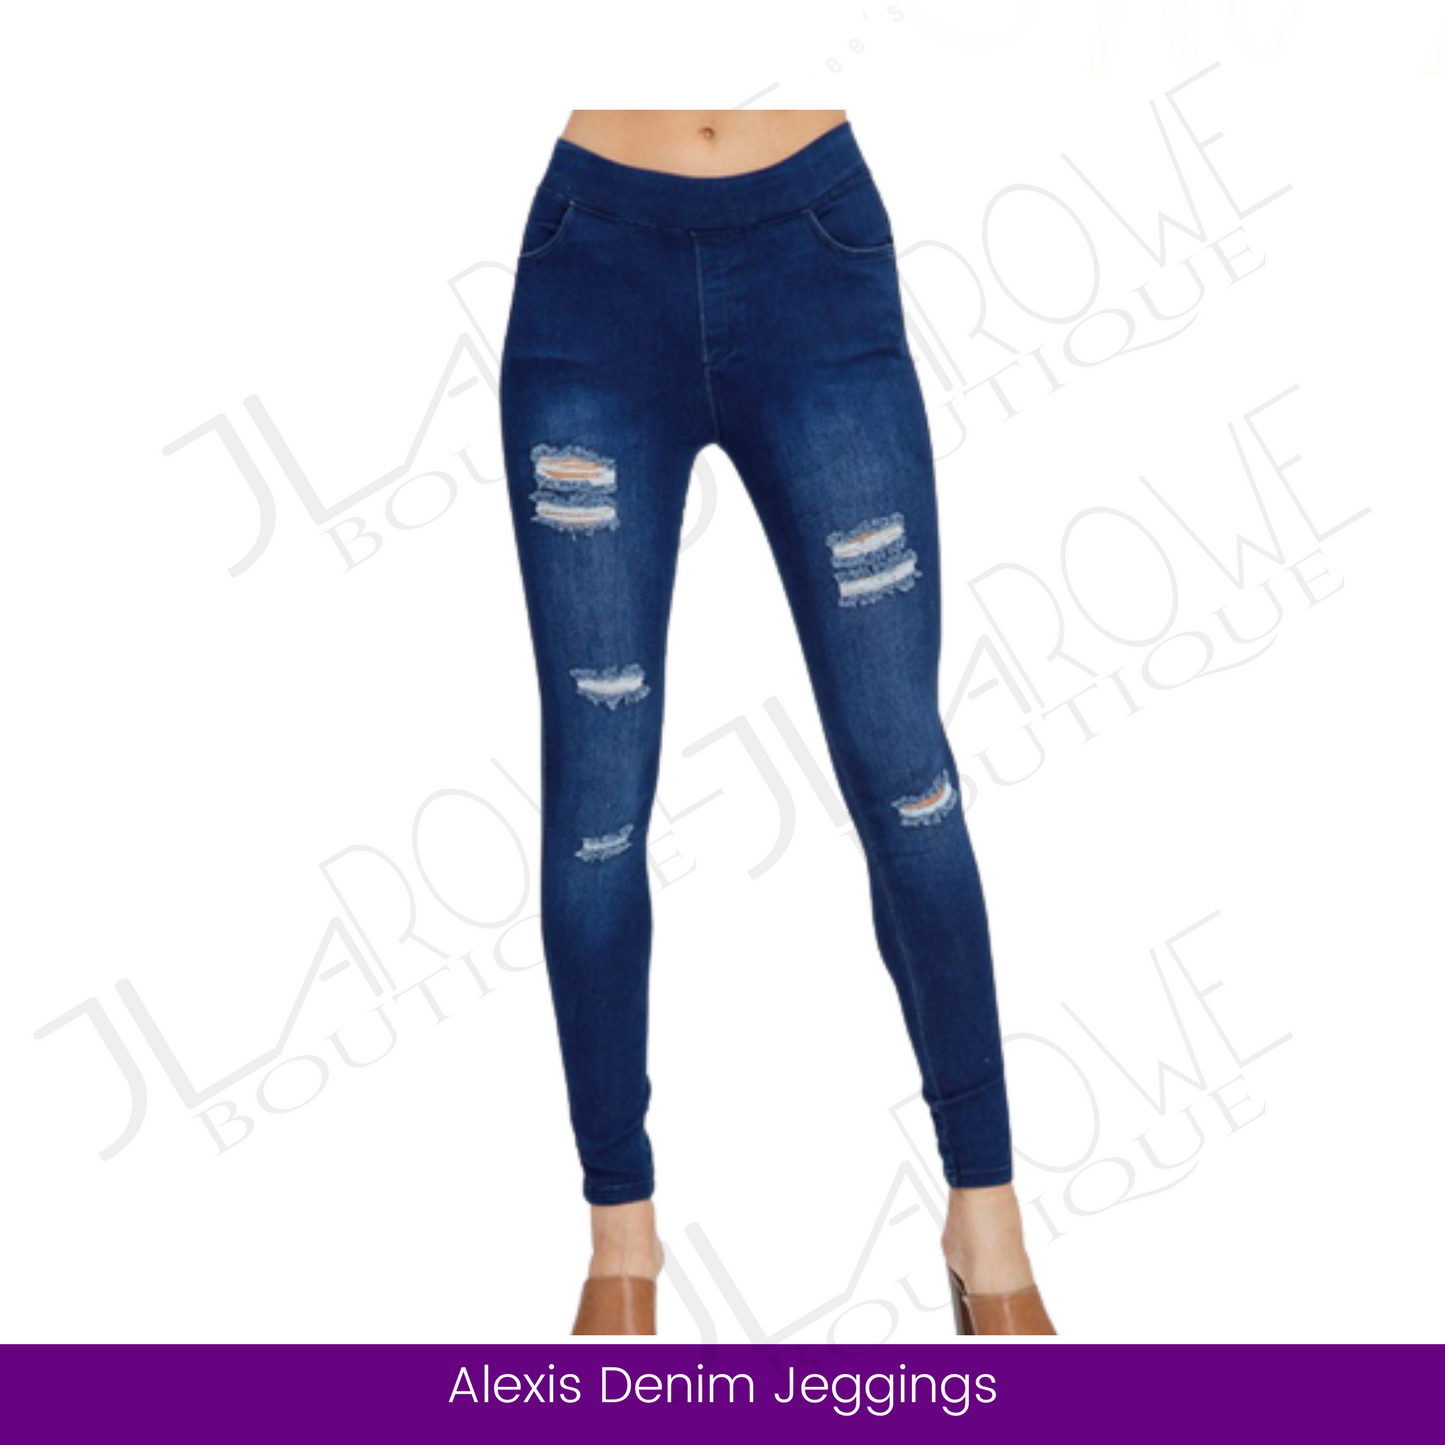 Alexis Denim Jeggings (Limited Stock)